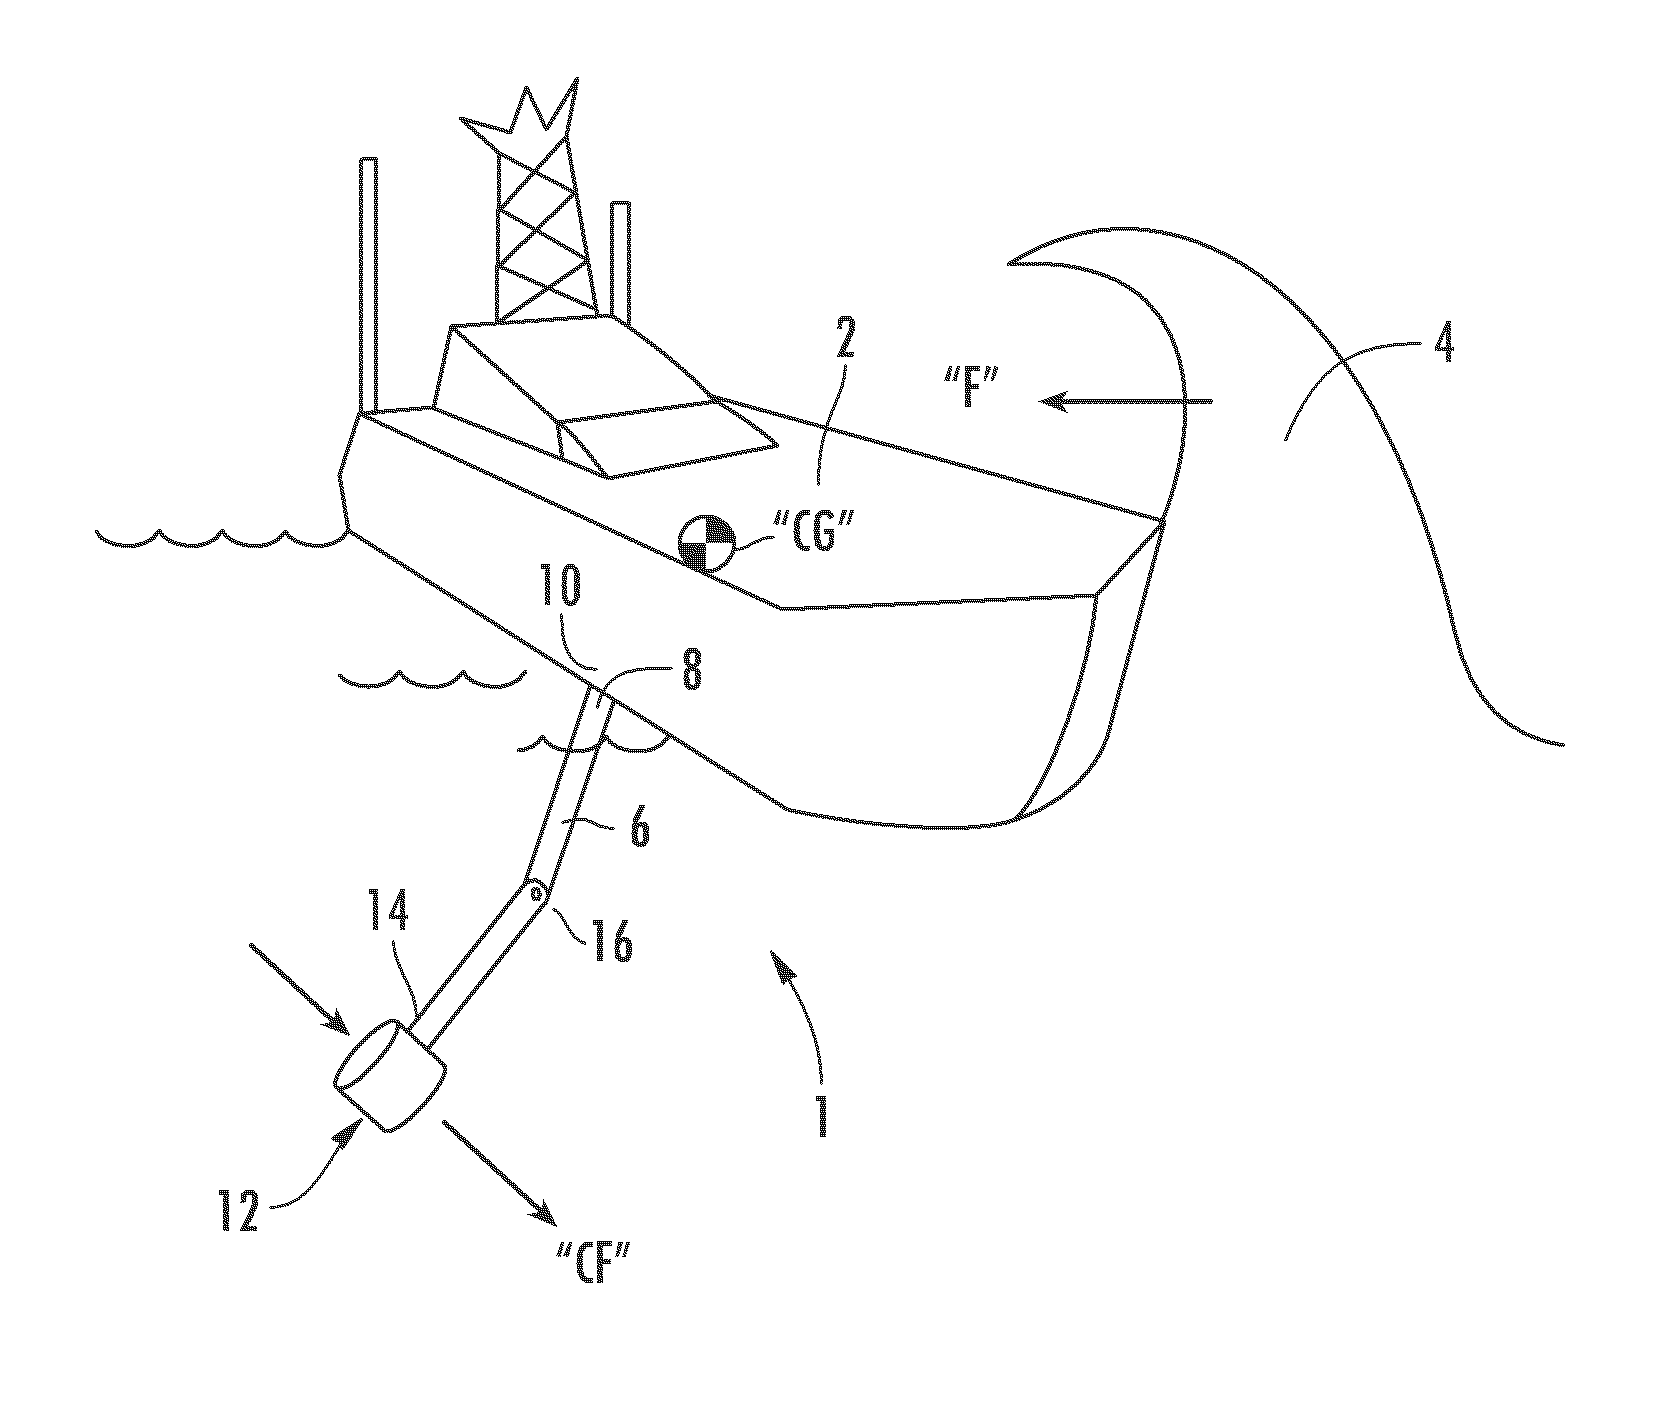 System and method for dynamic stabilization and navigation in high sea states